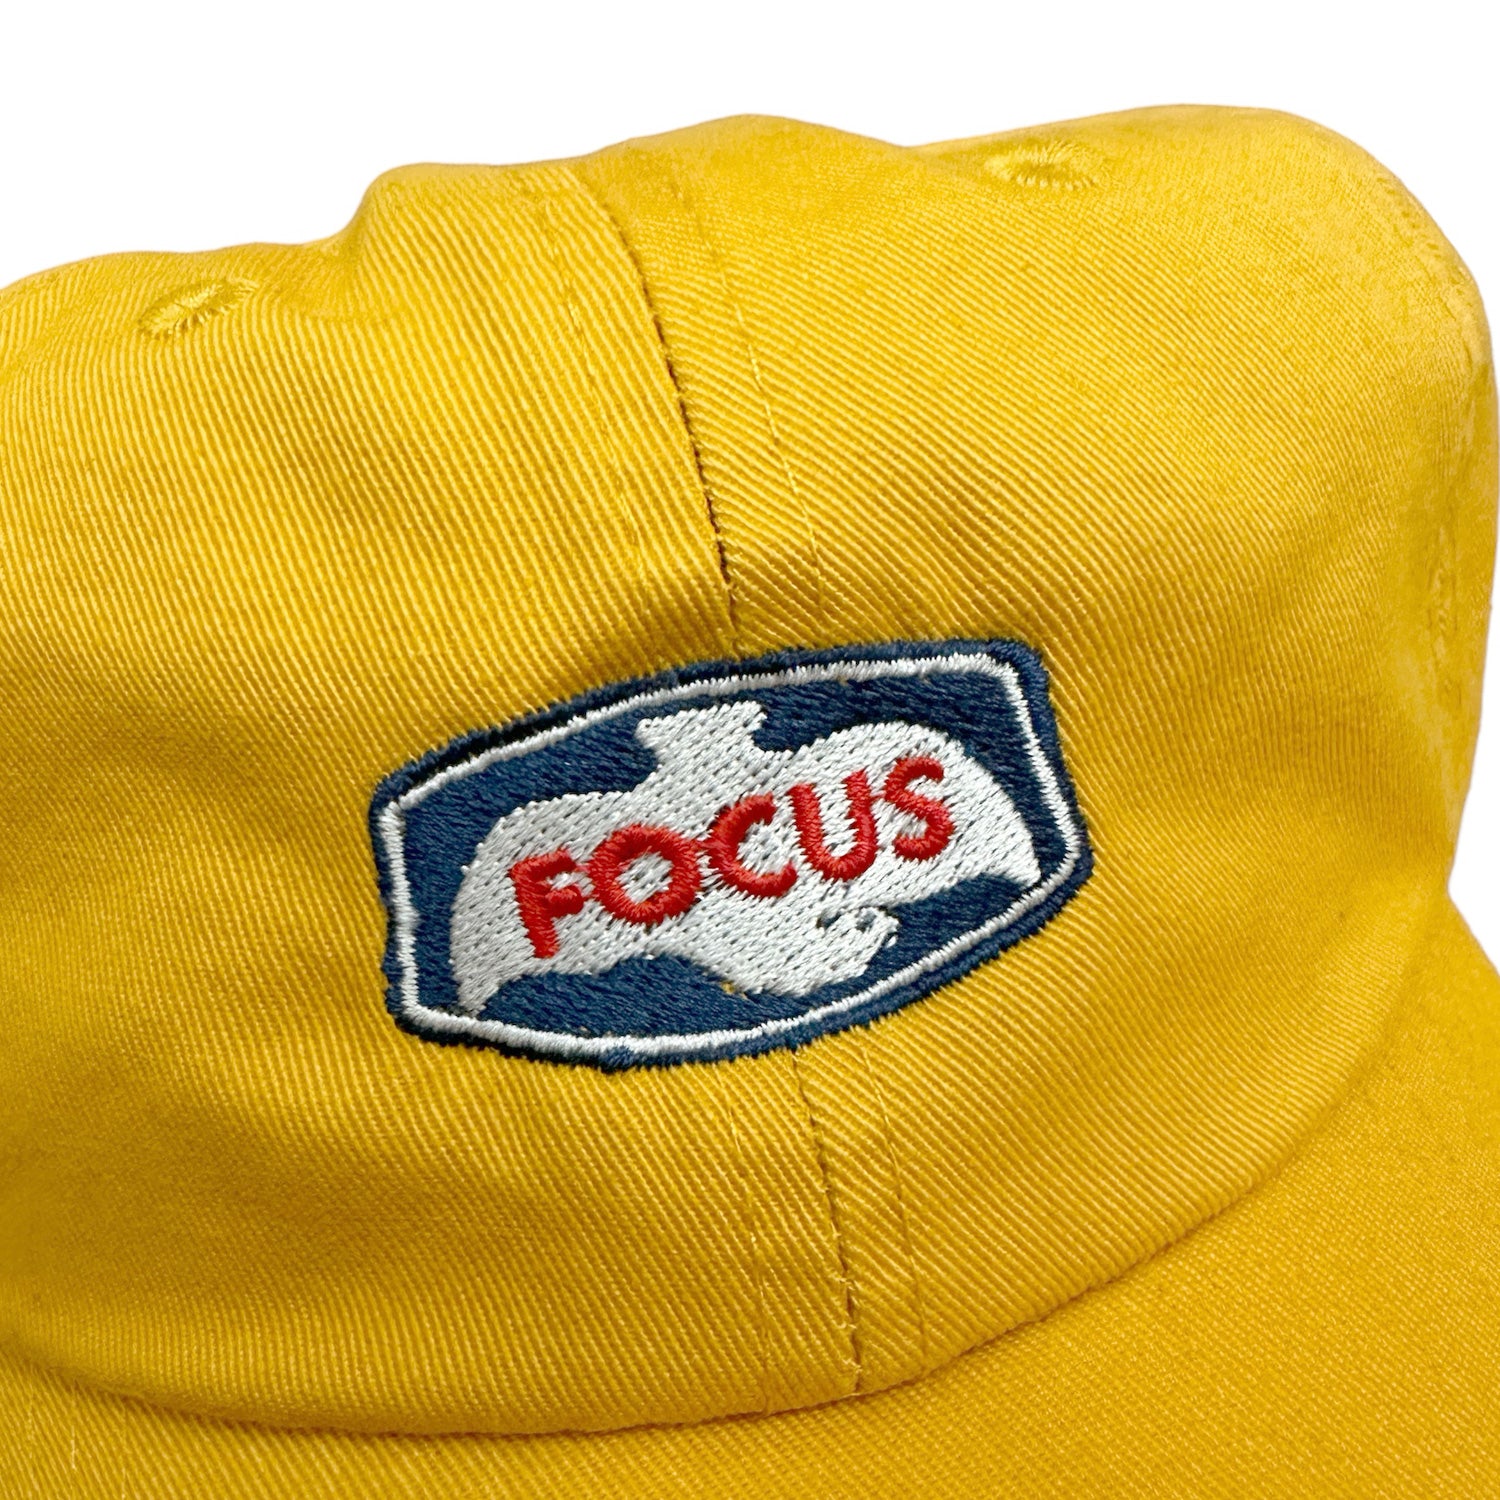 Canary yellow focus 6 panel cap with white, red and blue focus Birds Eye logo on front. Free uk shipping over £50